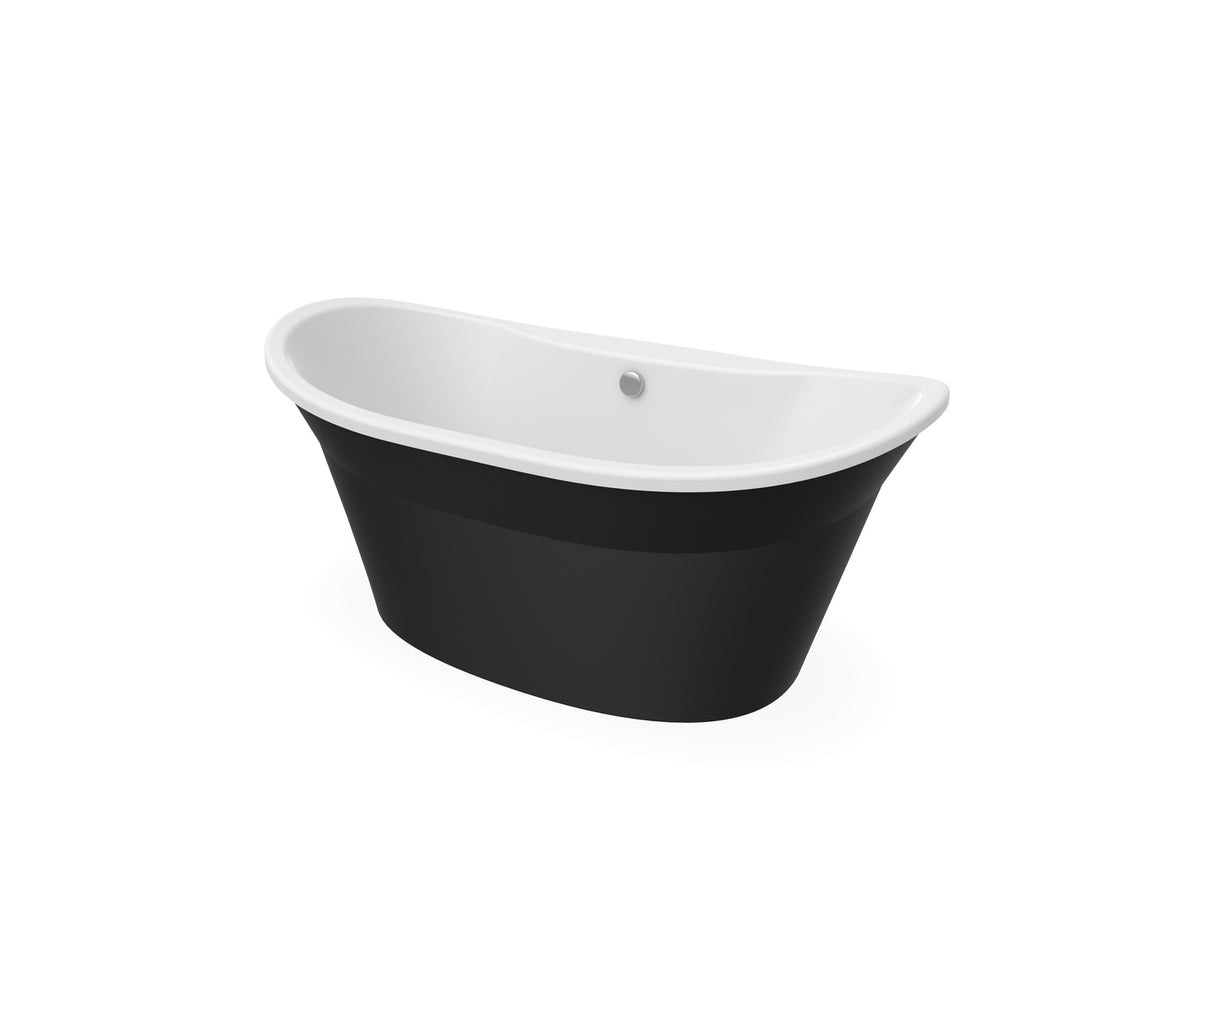 MAAX 106150-000-002-127 Orchestra 6032 AcrylX Freestanding Center Drain Bathtub in White with Black Skirt